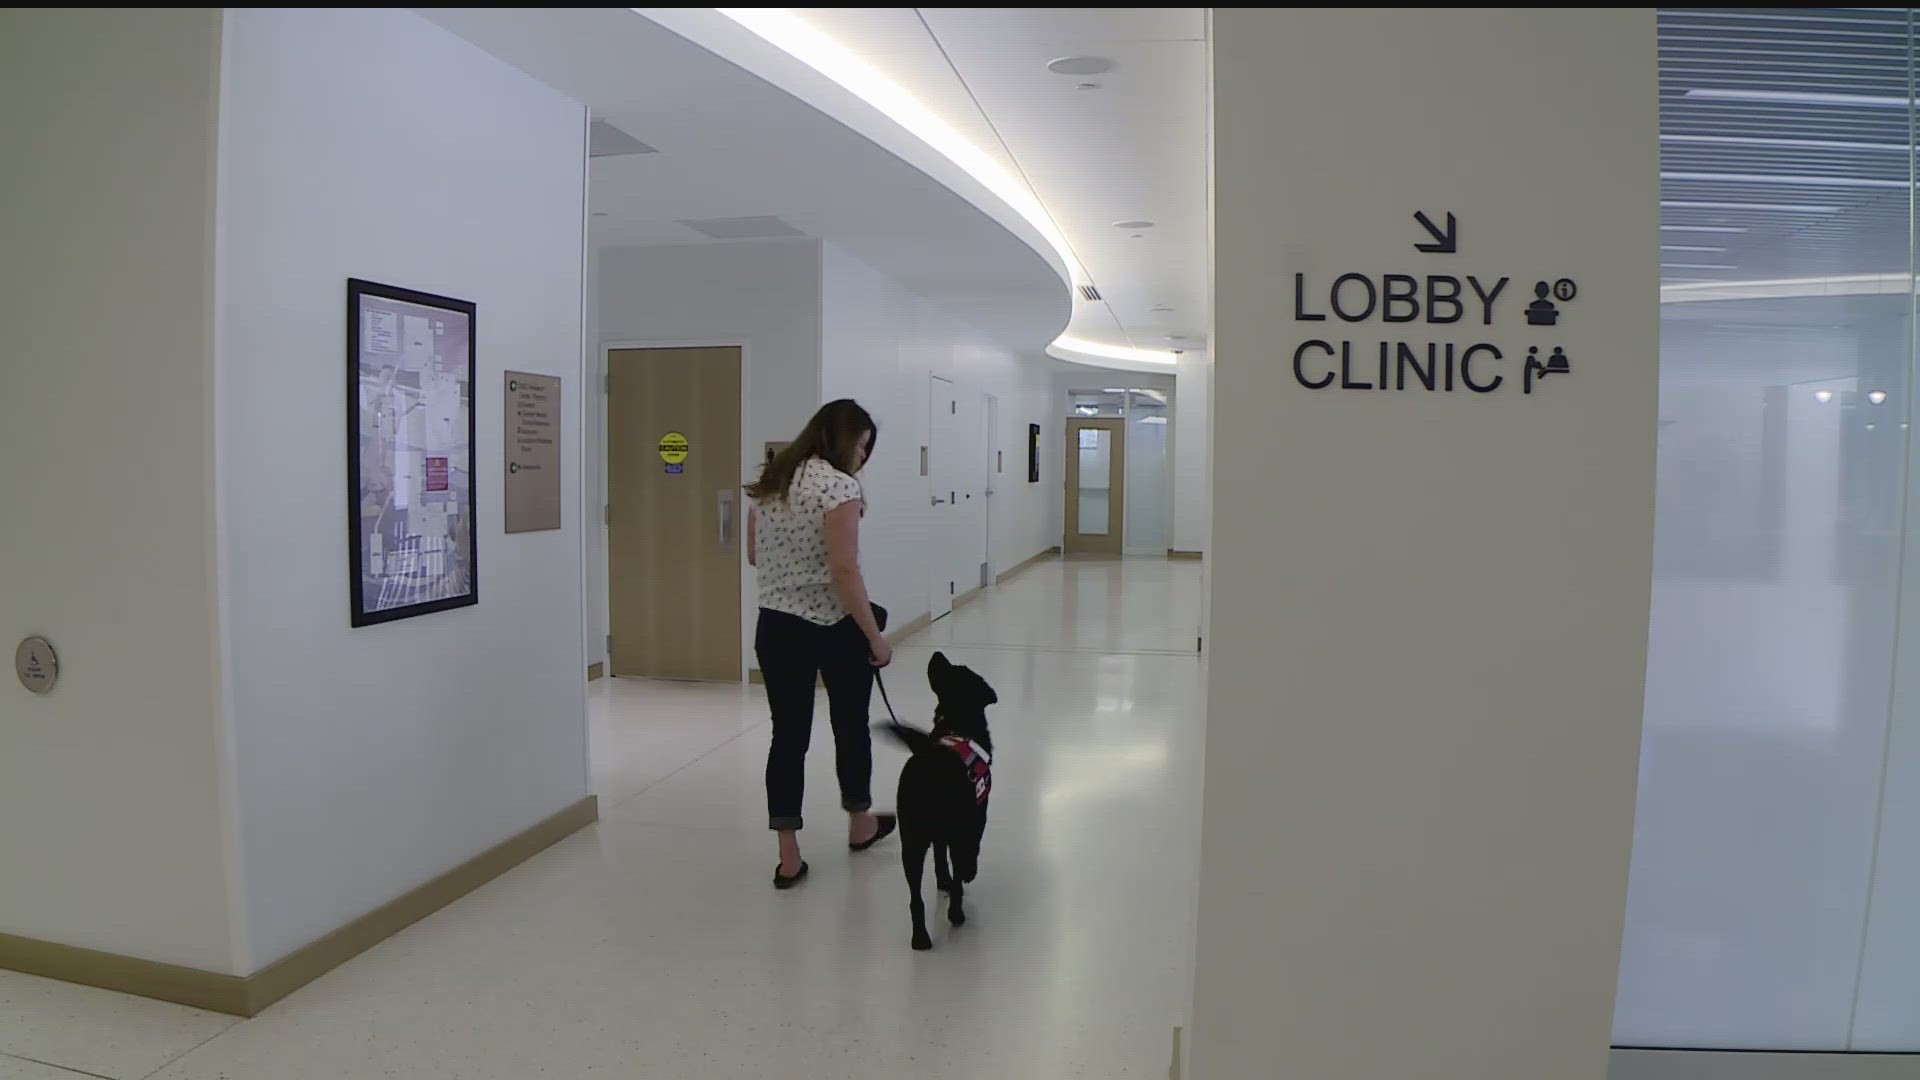 A four-legged employee that likes to wag her tail has become the patients' favorite face to see.